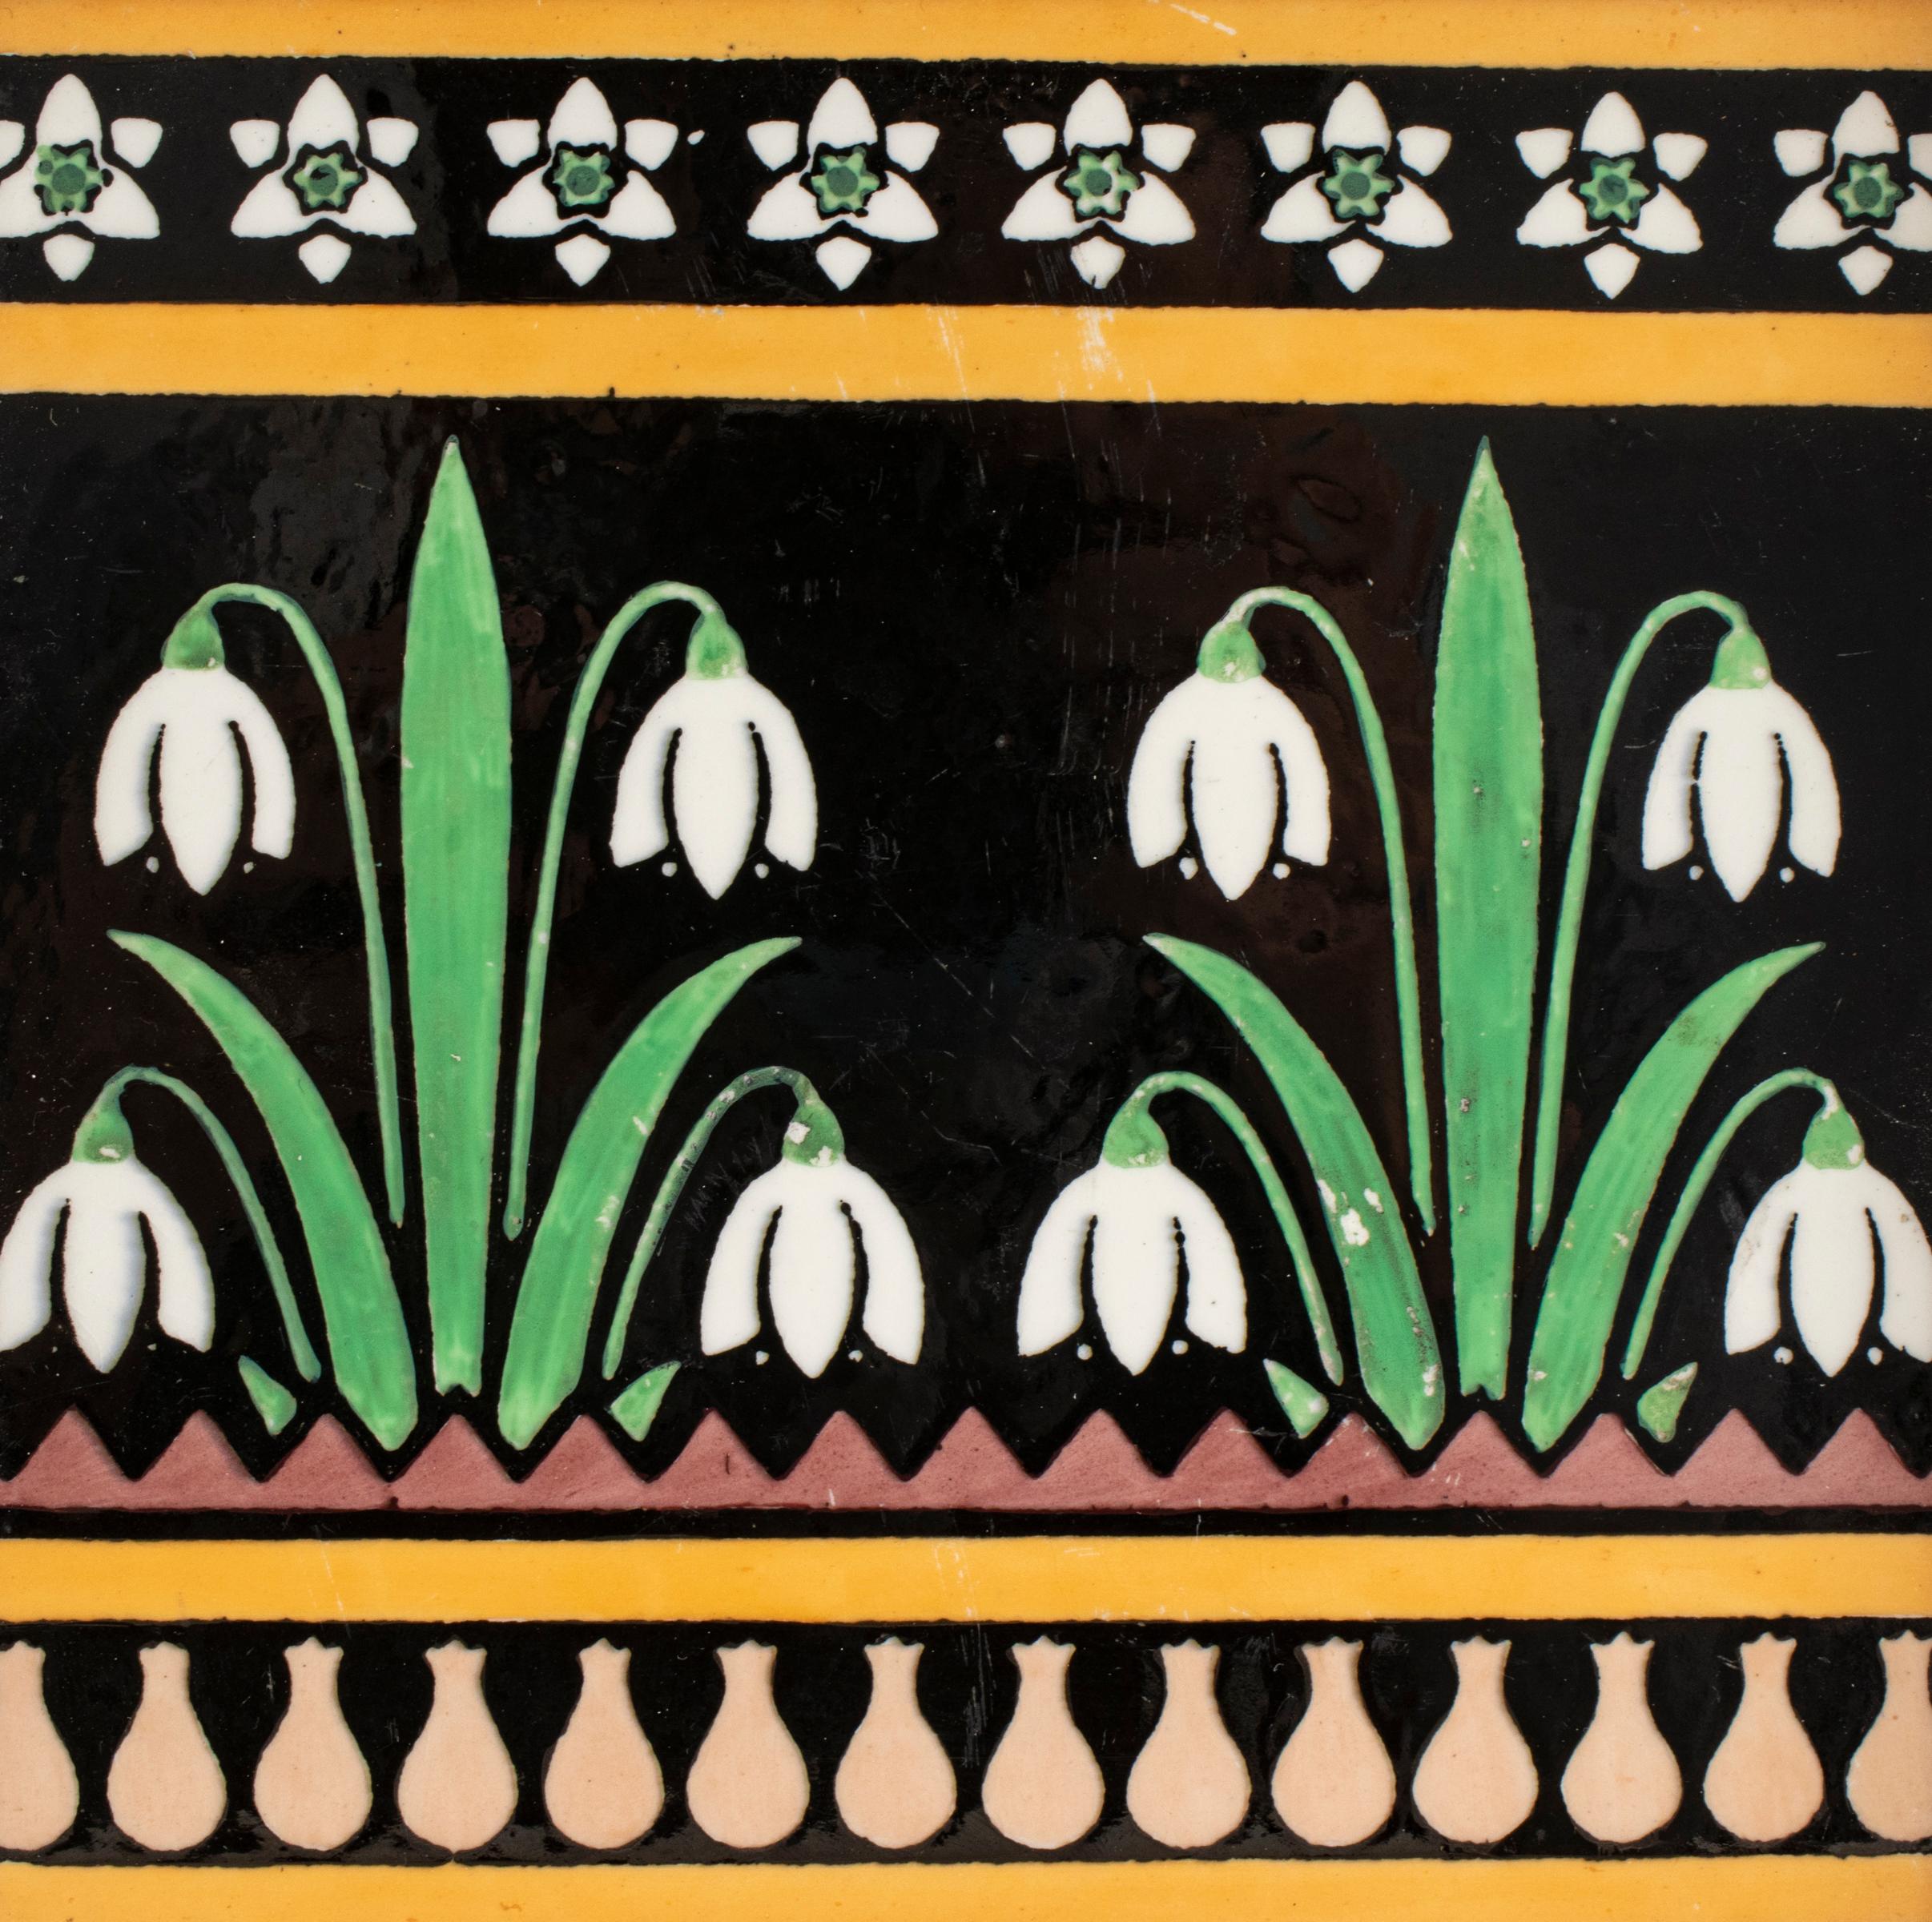 English Arts & Crafts Minton pottery tile designed by Christopher Dresser, late 19th century, featuring Art Nouveau / Aesthetic Movement lily of the valley floral motif, the tile reverse with embossed stamped letter 